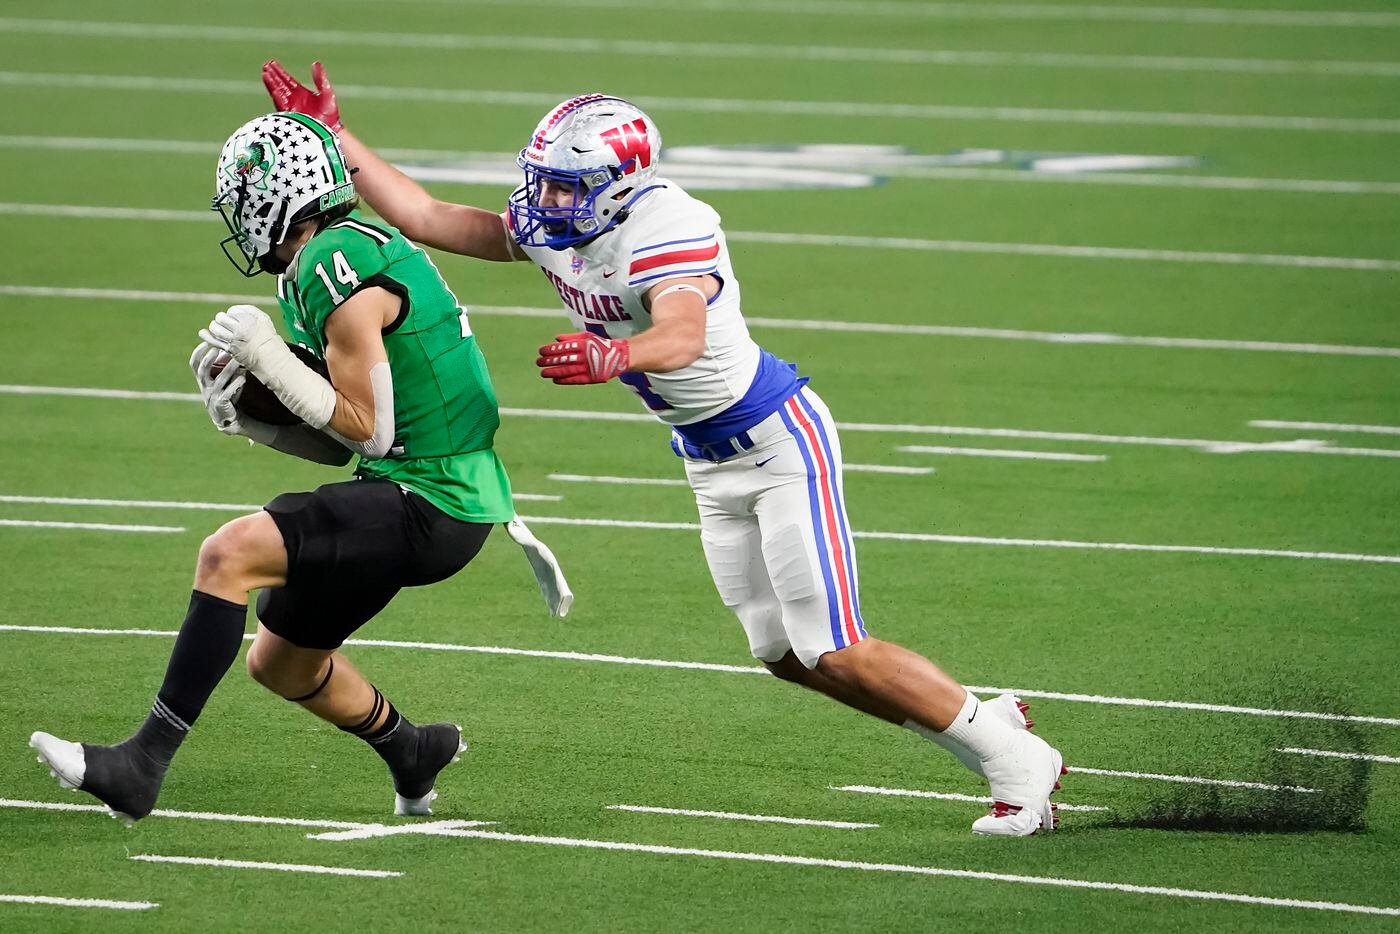 Southlake Carroll wide receiver Brady Boyd (14) catches a pass on a 49-yard touchdown past Austin Westlake defensive back Jax Crockett during the first quarter of the Class 6A Division I state football championship game at AT&T Stadium on Saturday, Jan. 16, 2021, in Arlington, Texas. (Smiley N. Pool/The Dallas Morning News)